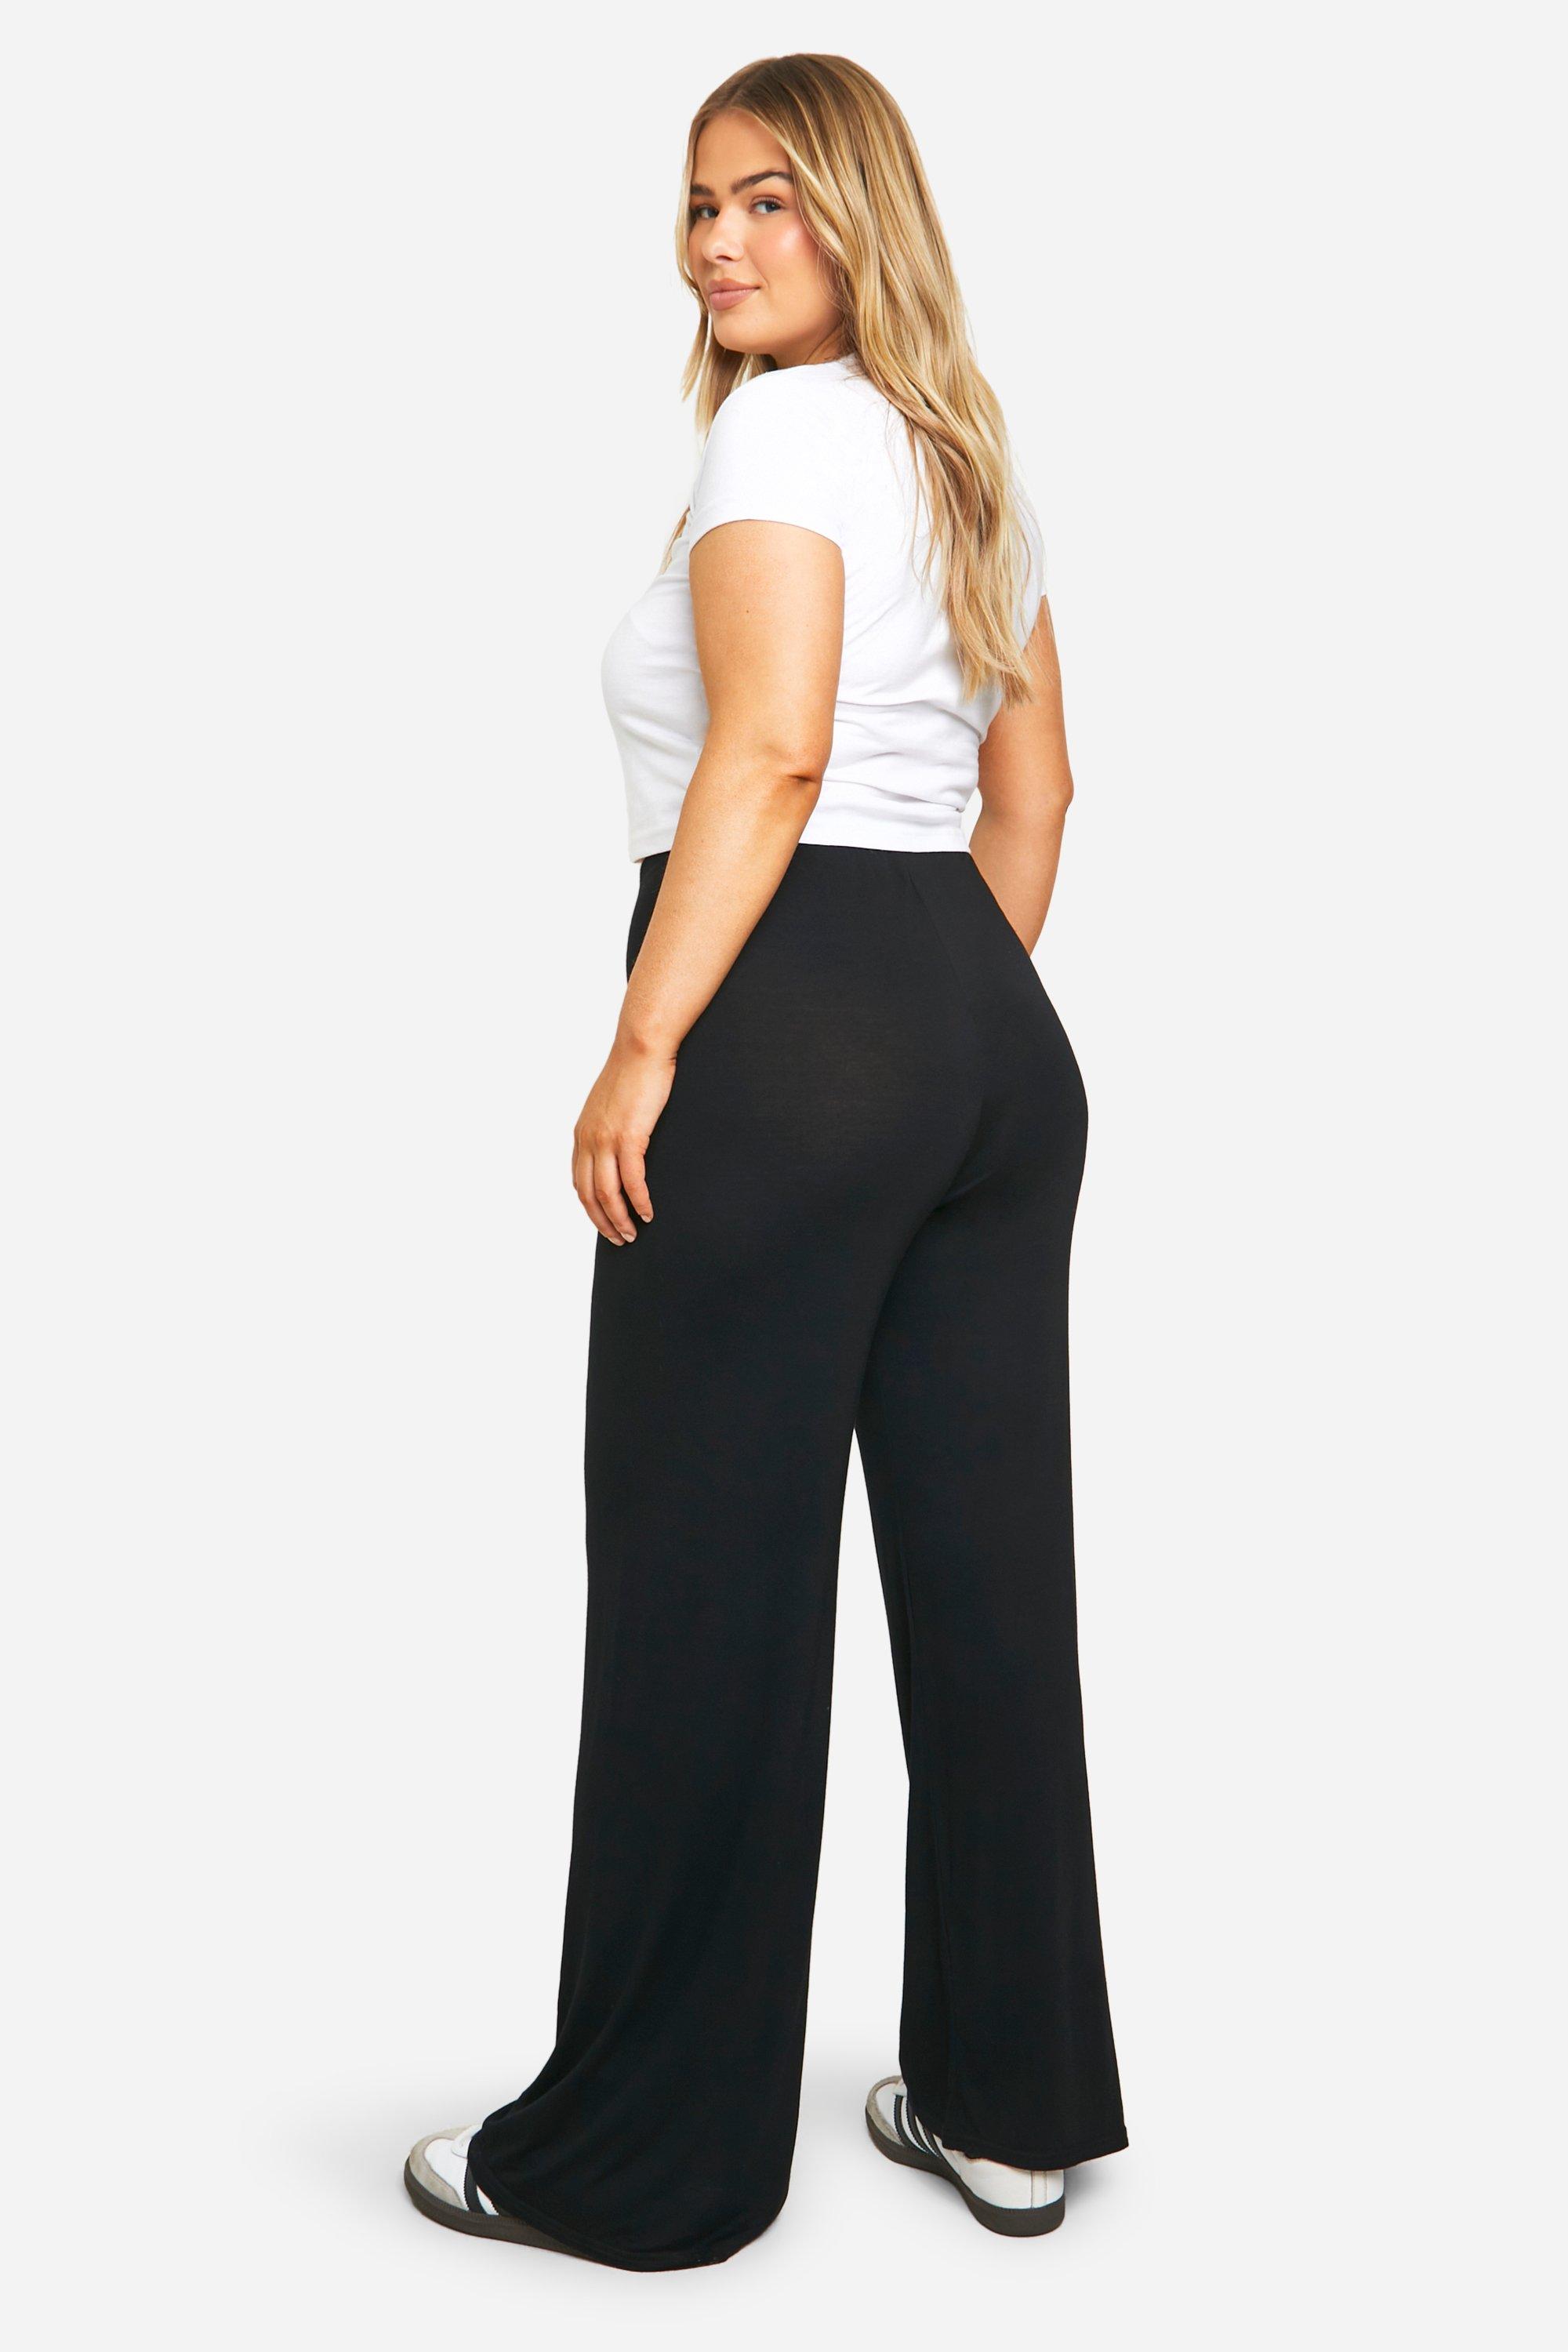 PMUYBHF Wide Leg Pants for Women With 36 Inseam 4Th of July Dress